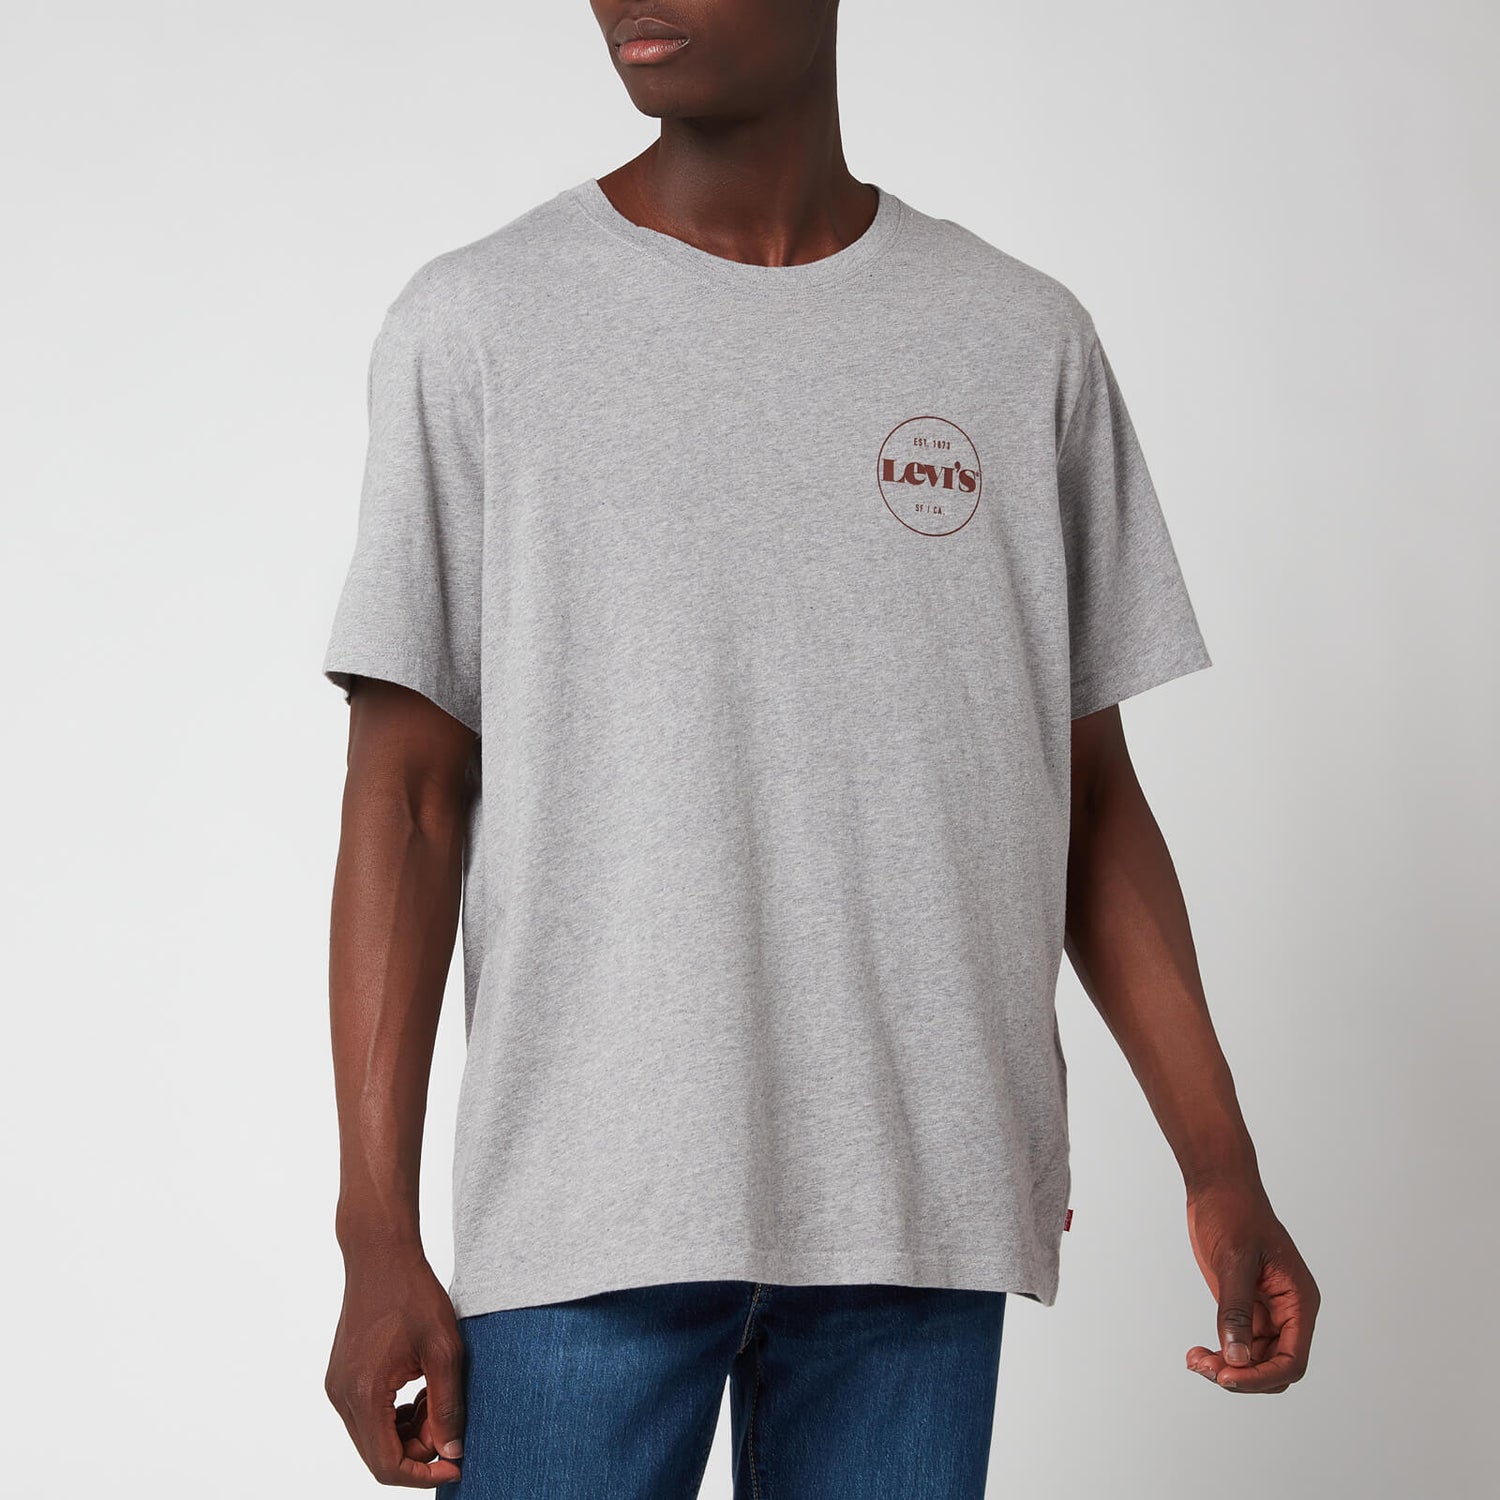 Levi's Men's Relaxed Fit Circle Logo T-Shirt - Heather Grey